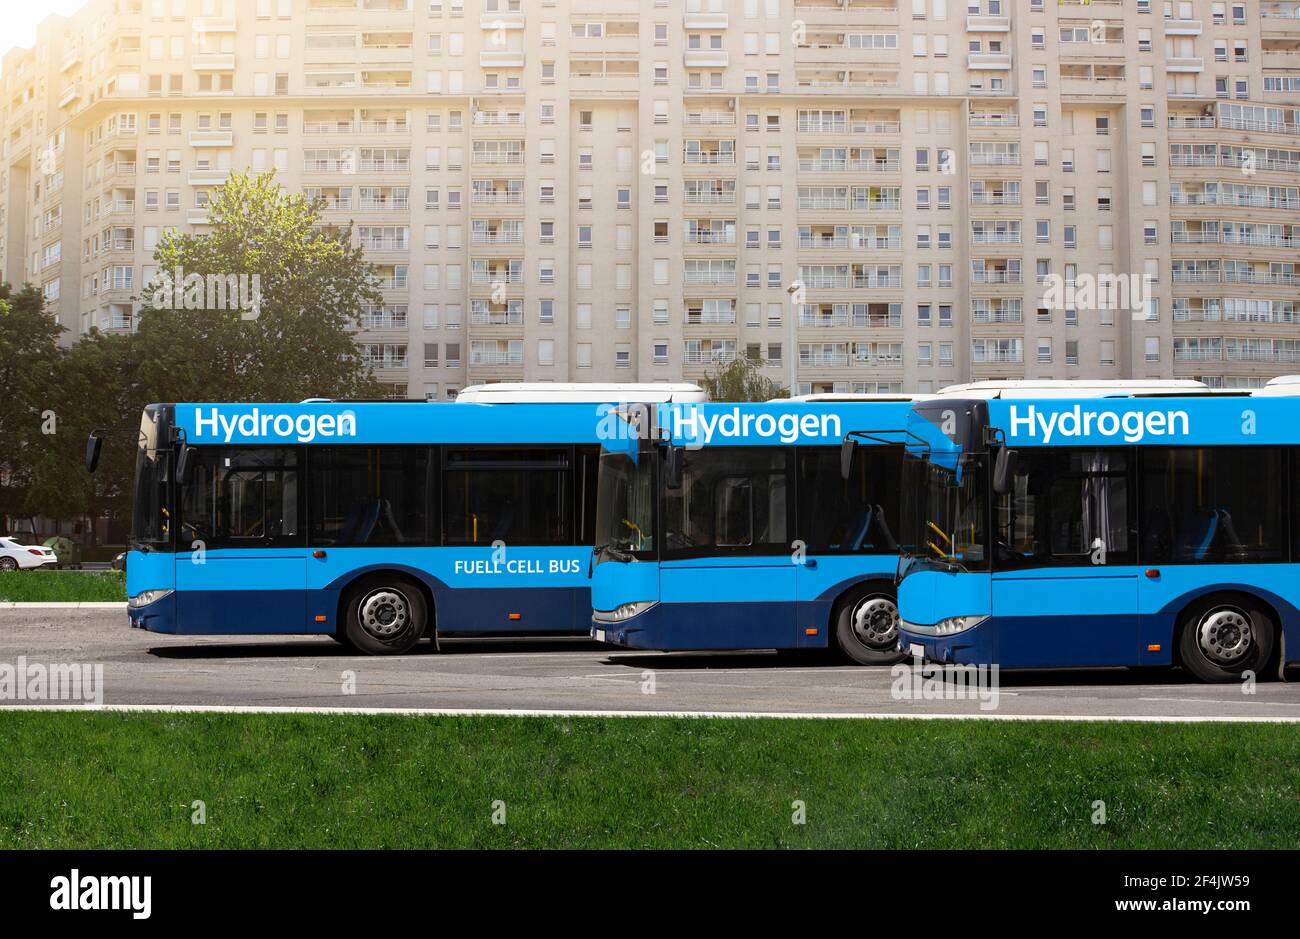 A hydrogen fuel cell buses stands at the bus station Stock Photo